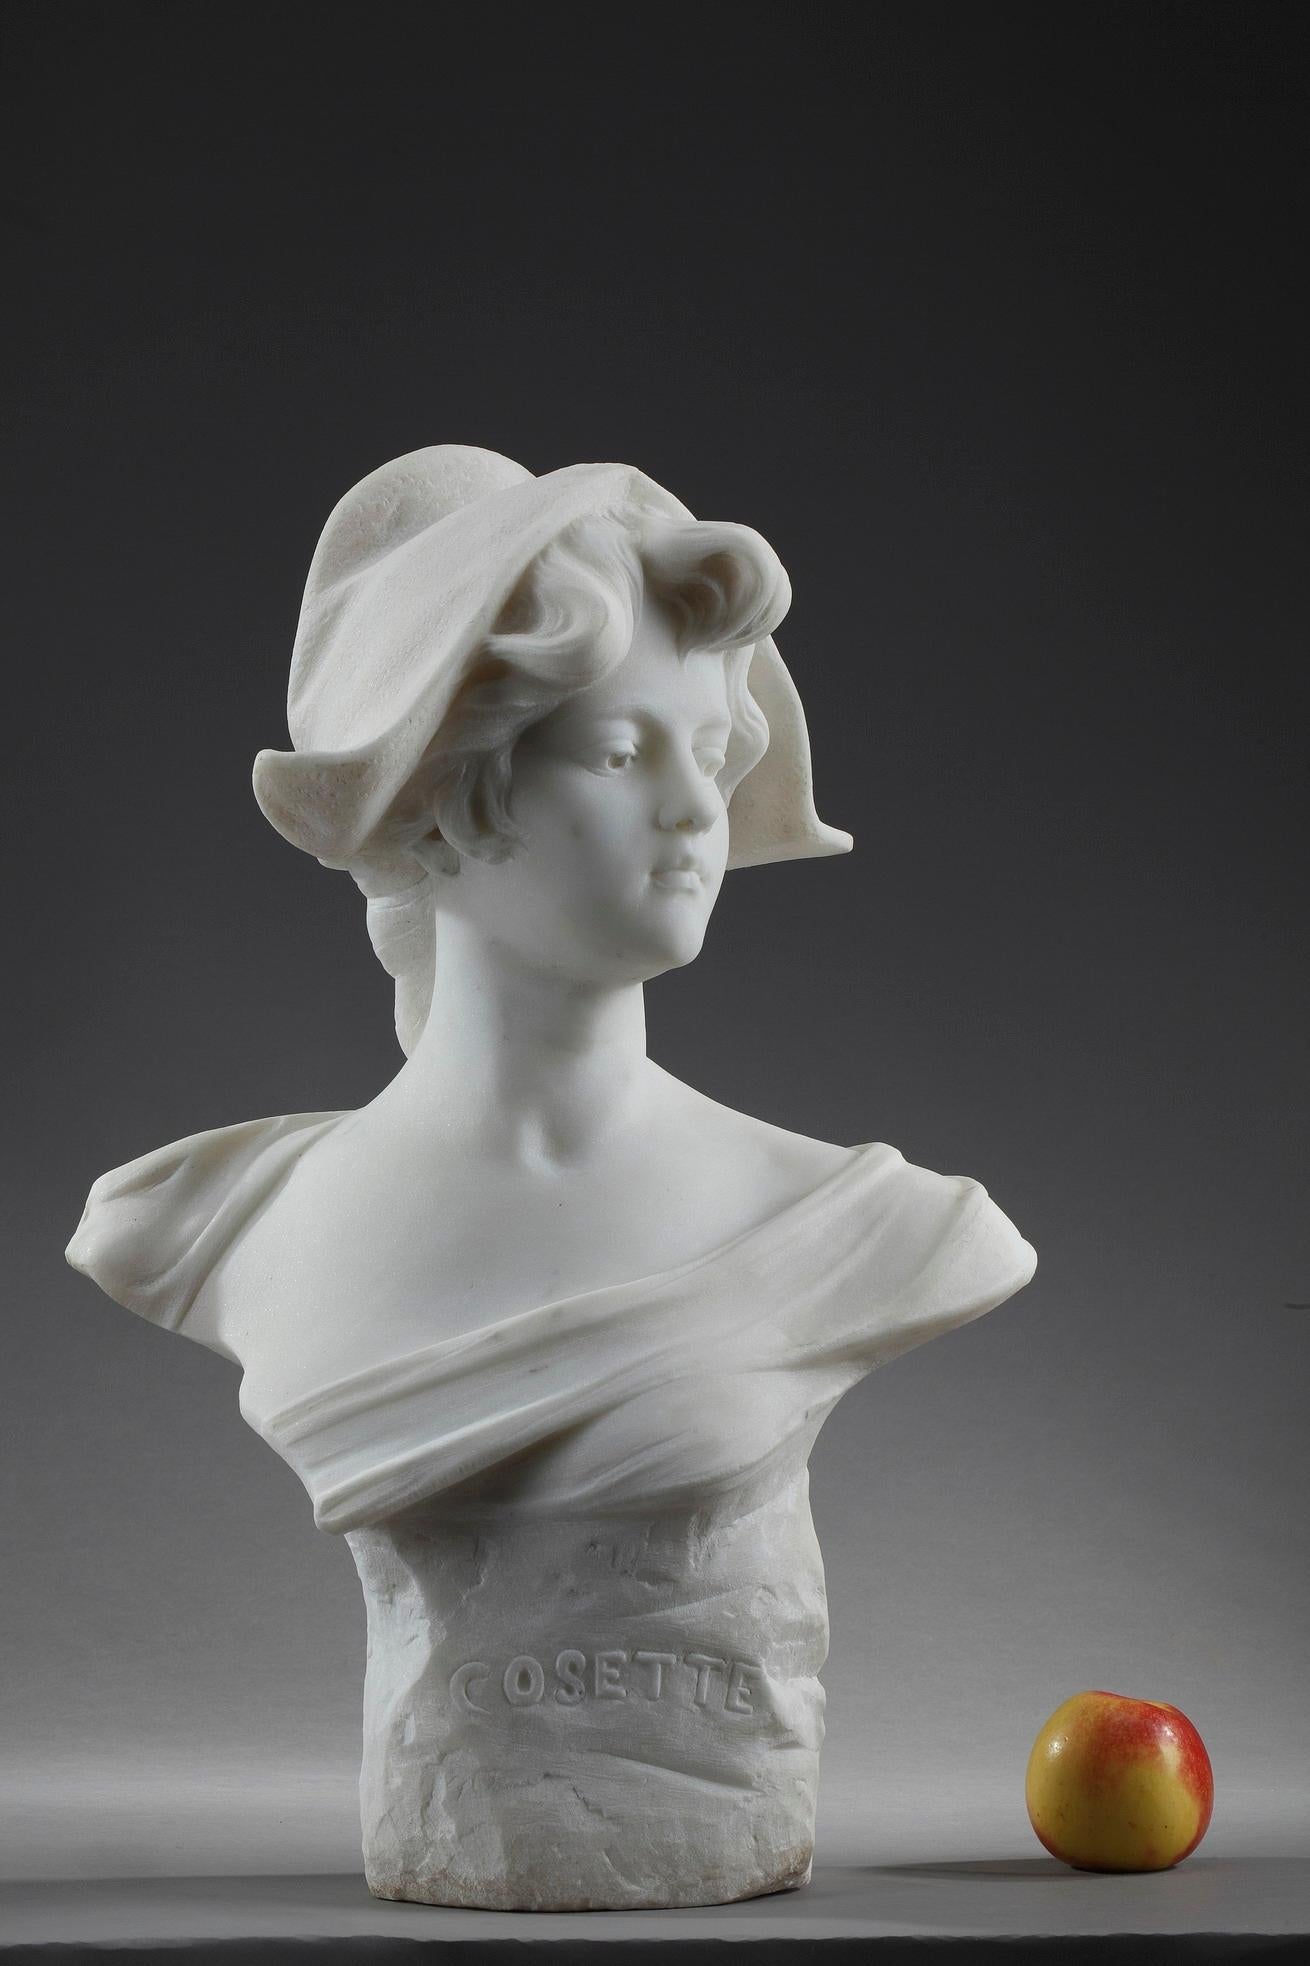 Large Art Nouveau white marble bust featuring Cosette, the heroine of Victor Hugo's novel Les Misérables (1862). She wears the Phrygian cap, symbol of freedom, which links her cause to that of the French nation. Cosette is depicted as a beautiful,